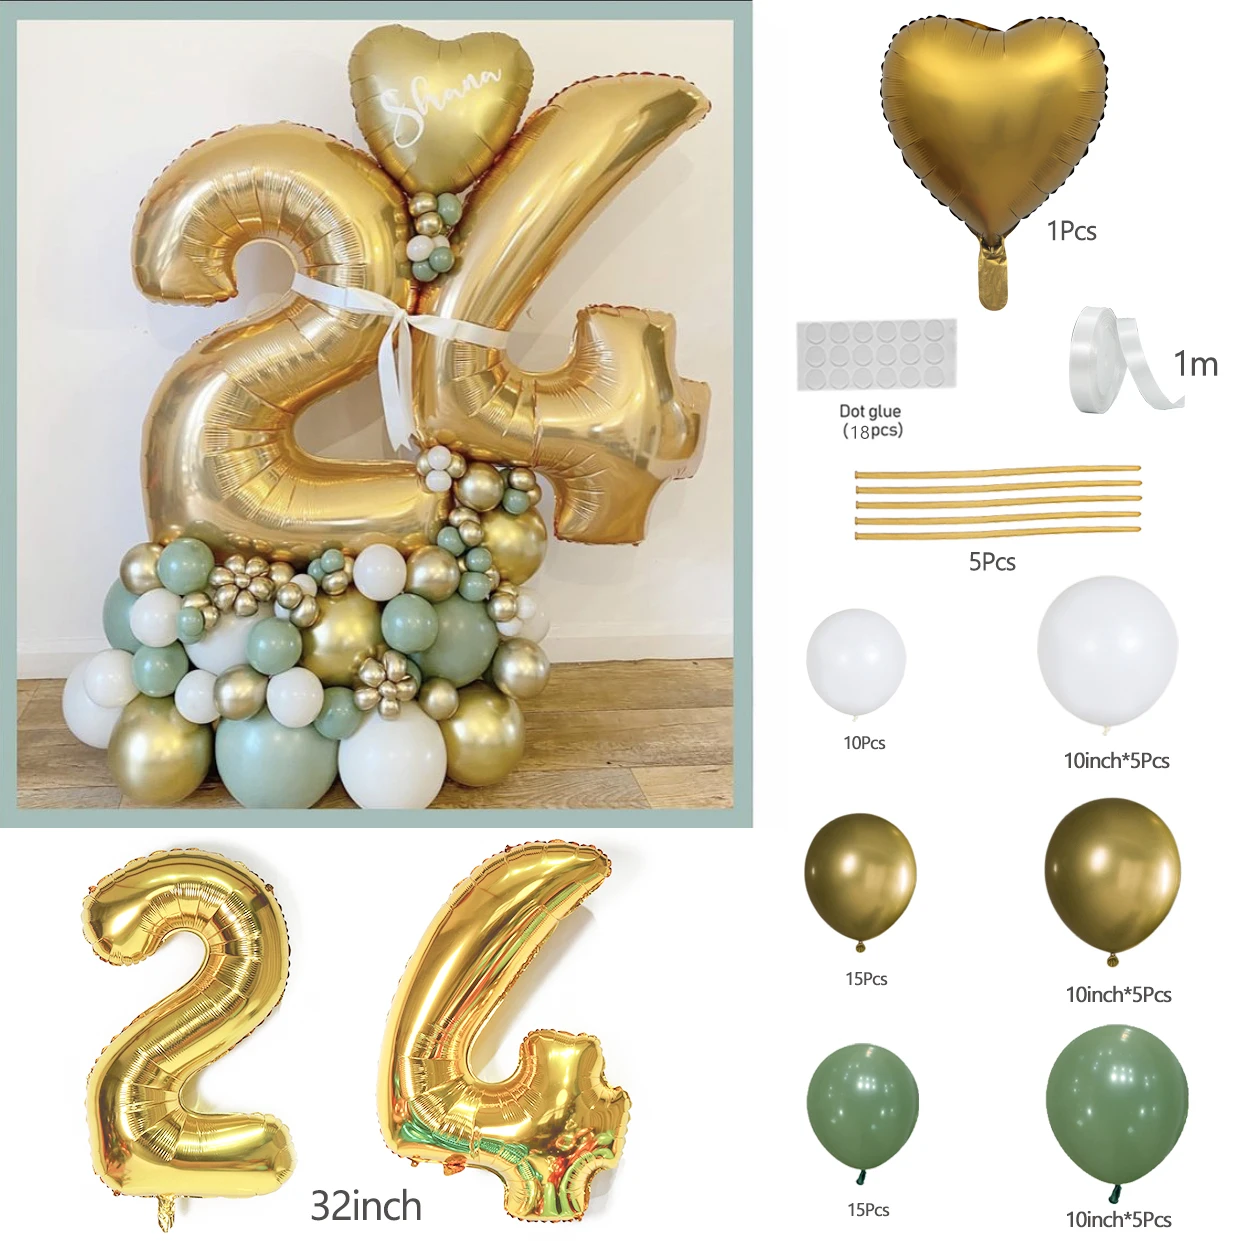 

18 20 30 40 50 60 70 Years old Kid Adult Birthday Party Decoration Balloon Gold 32inch Number Balloon Set DIY Balls Stand Column